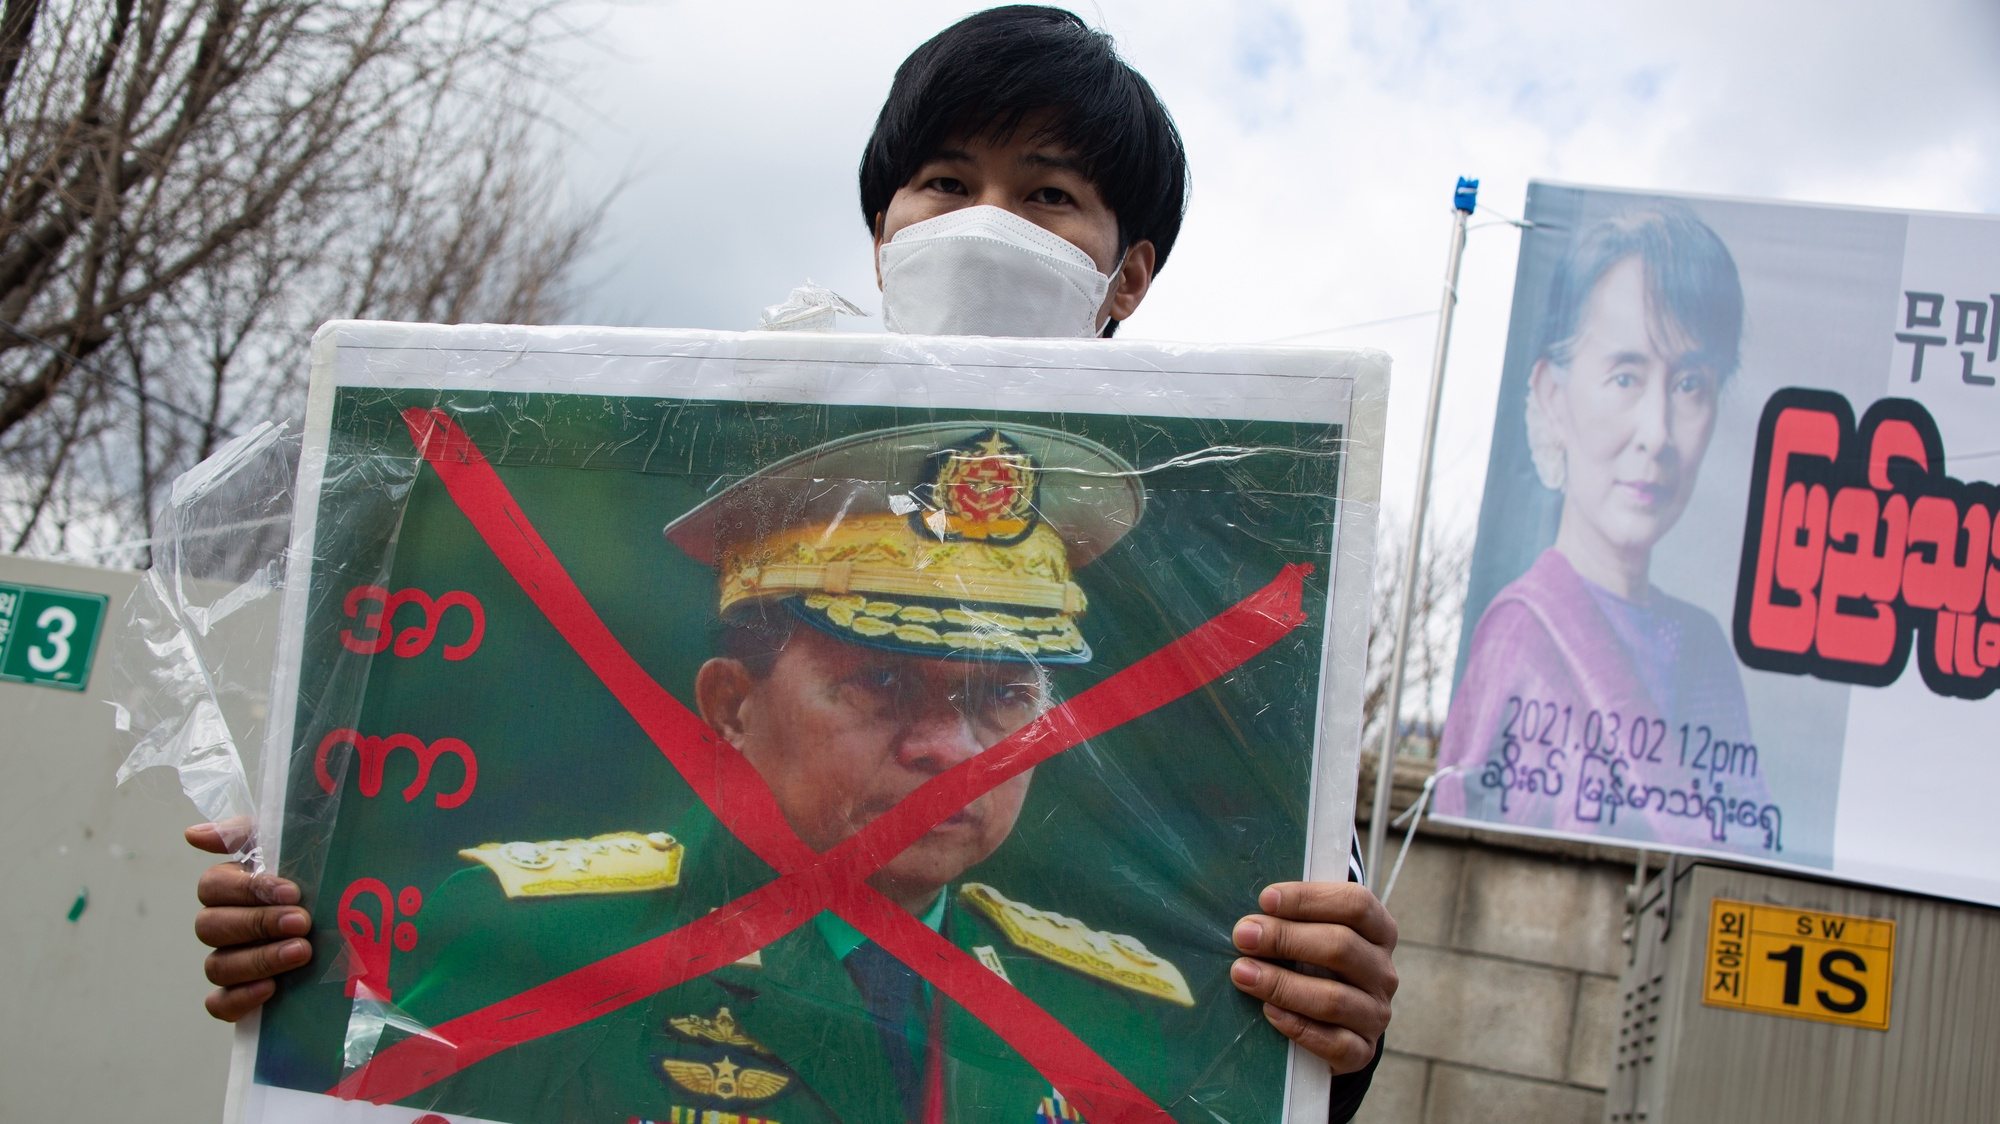 epa09045681 A Myanmar national living in South Korea holds a crossed-out photo of Myanmar&#039;s junta chief General Min Aung Hlaing during a protest against the Myanmar&#039;s military coup, outside the Embassy of Myanmar in Seoul, South Korea, 02 March 2021. Foreign ministers of the Association of Southeast Asian Nations (ASEAN) are expected to hold a special meeting on the Myanmar political crisis on 02 March, amid rising tension in the country between anti-coup protesters and security forces.  EPA/JEON HEON-KYUN